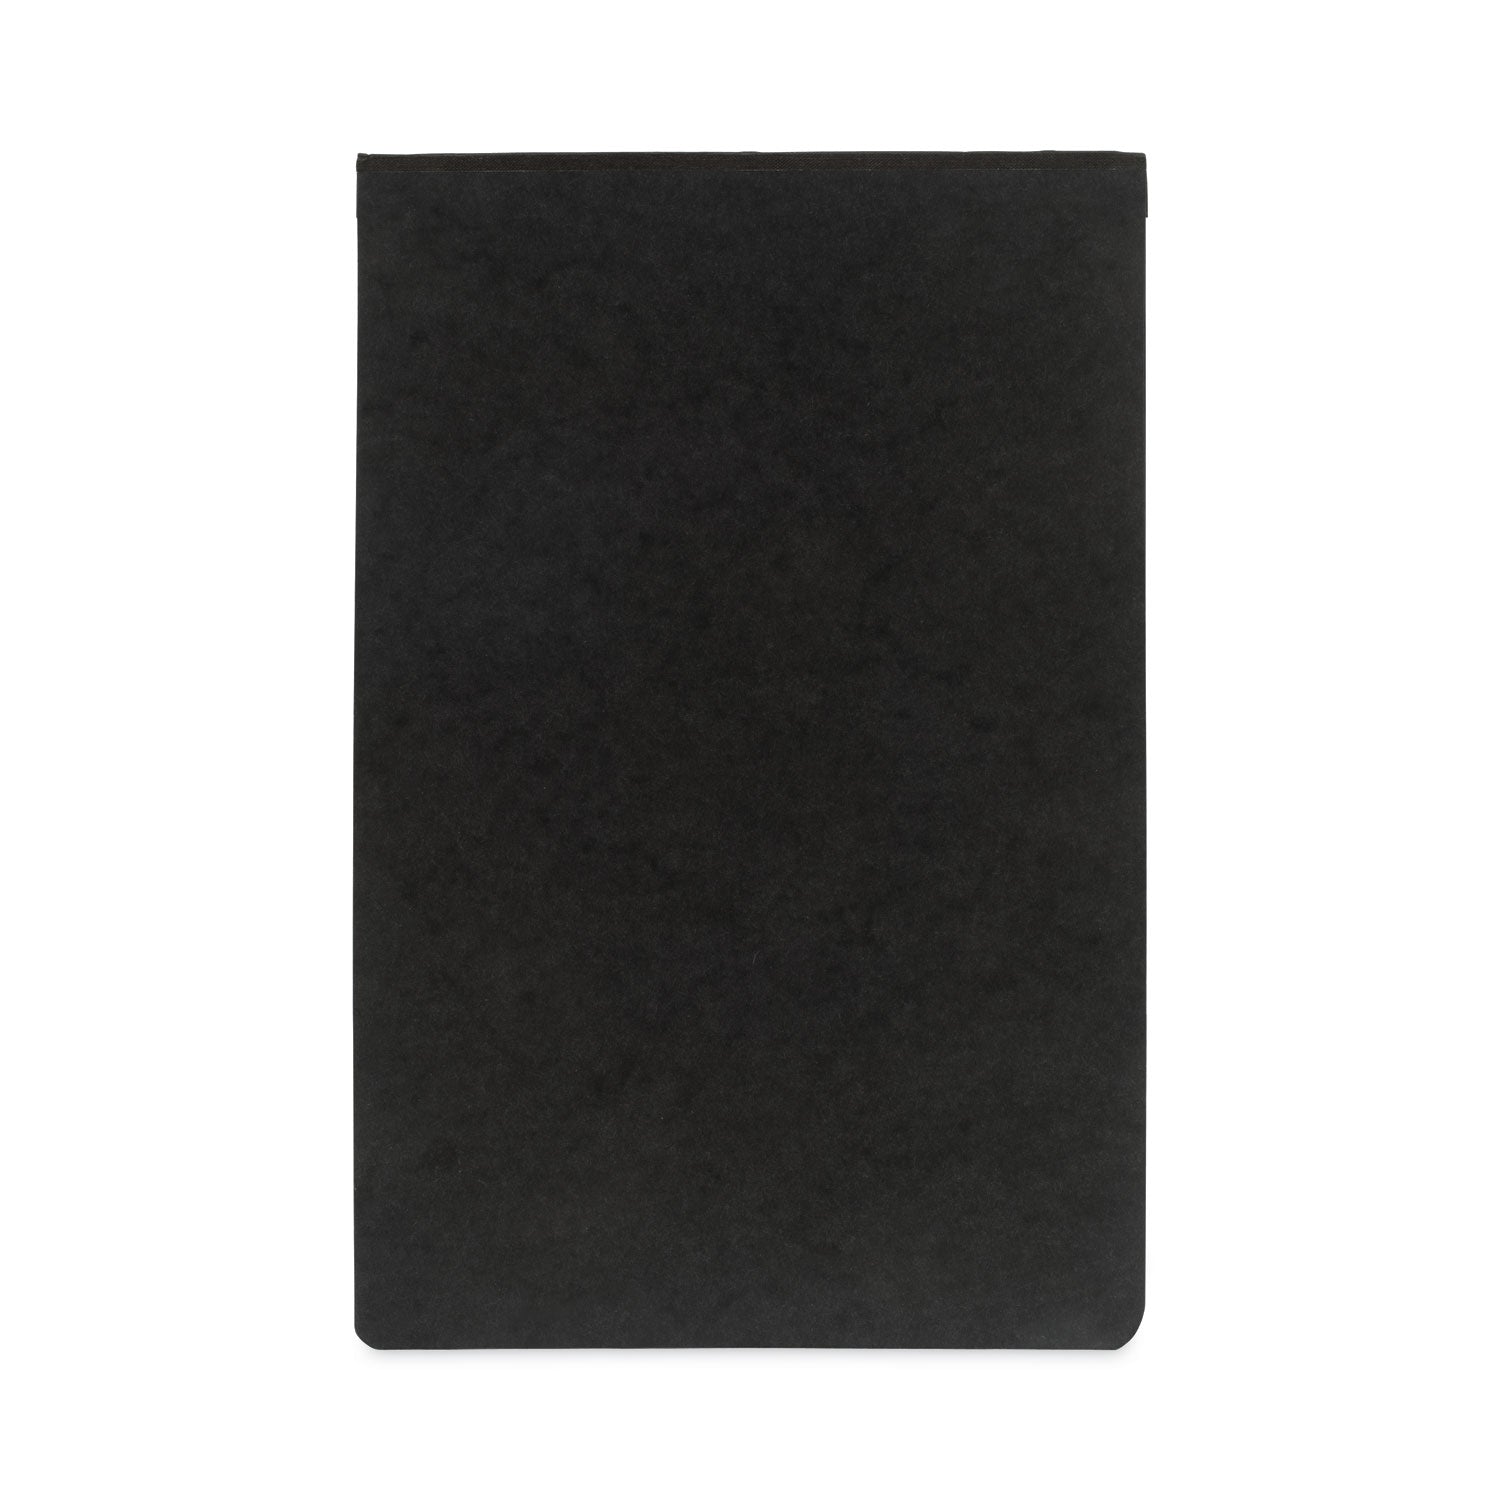 Pressboard Report Cover with Tyvek Reinforced Hinge, Two-Piece Prong Fastener, 3" Capacity, 11 x 17, Black/Black - 